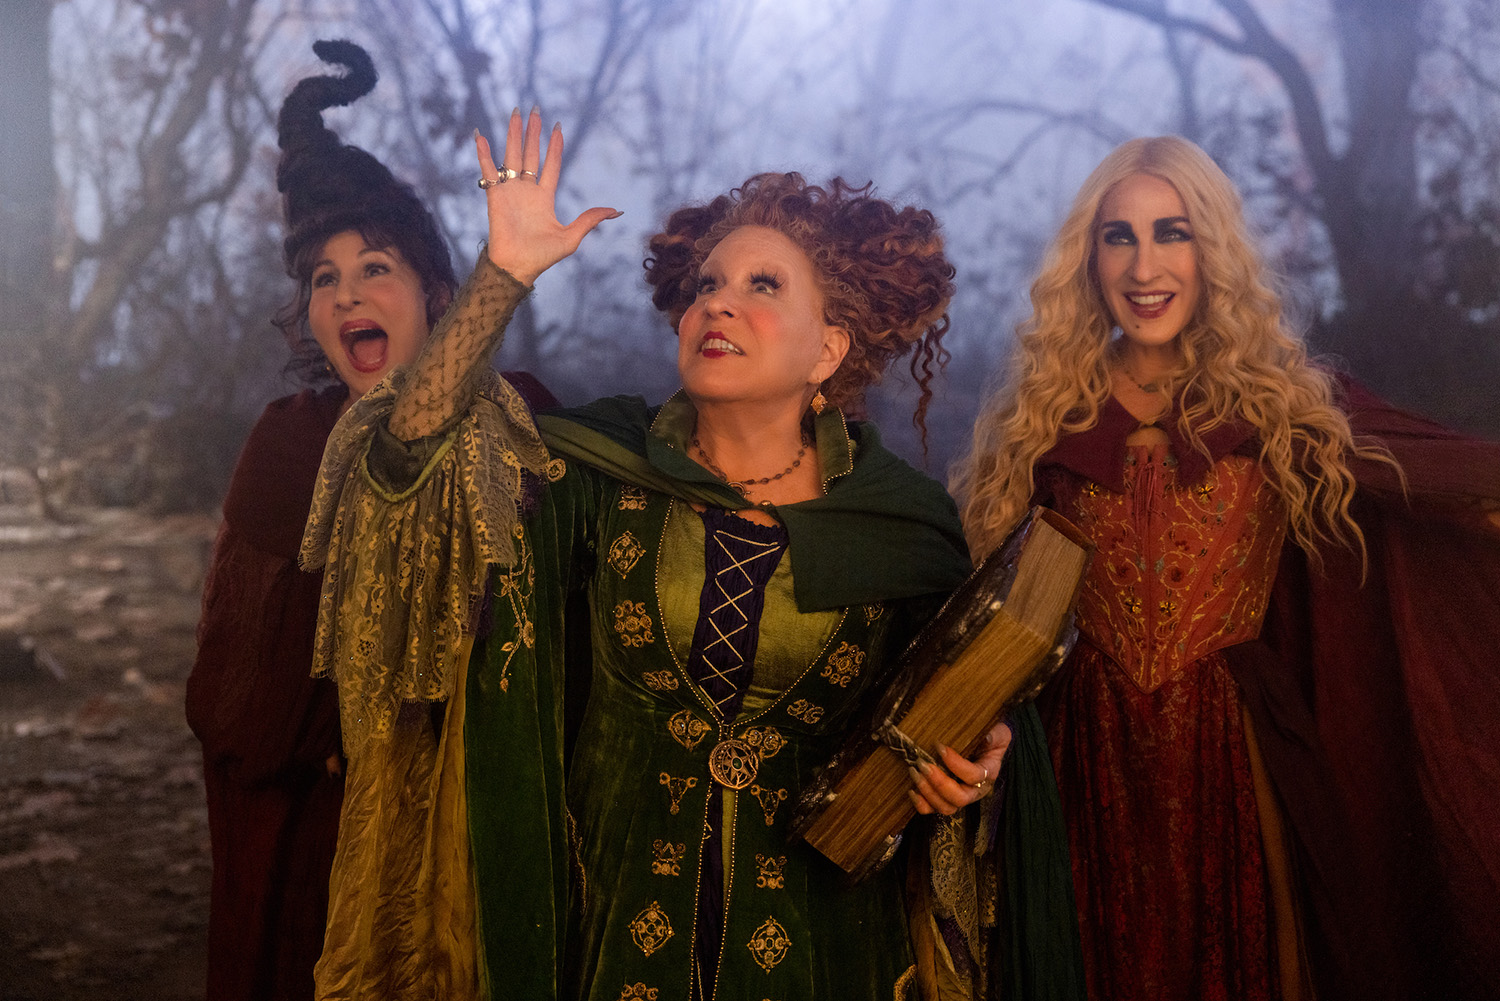 Does the Hocus Pocus 2 post-credits scene indicate a third movie? Kathy Najimy as Mary Sanderson, Bette Midler as Winifred Sanderson, and Sarah Jessica Parker as Sarah Sanderson in Hocus Pocus 2